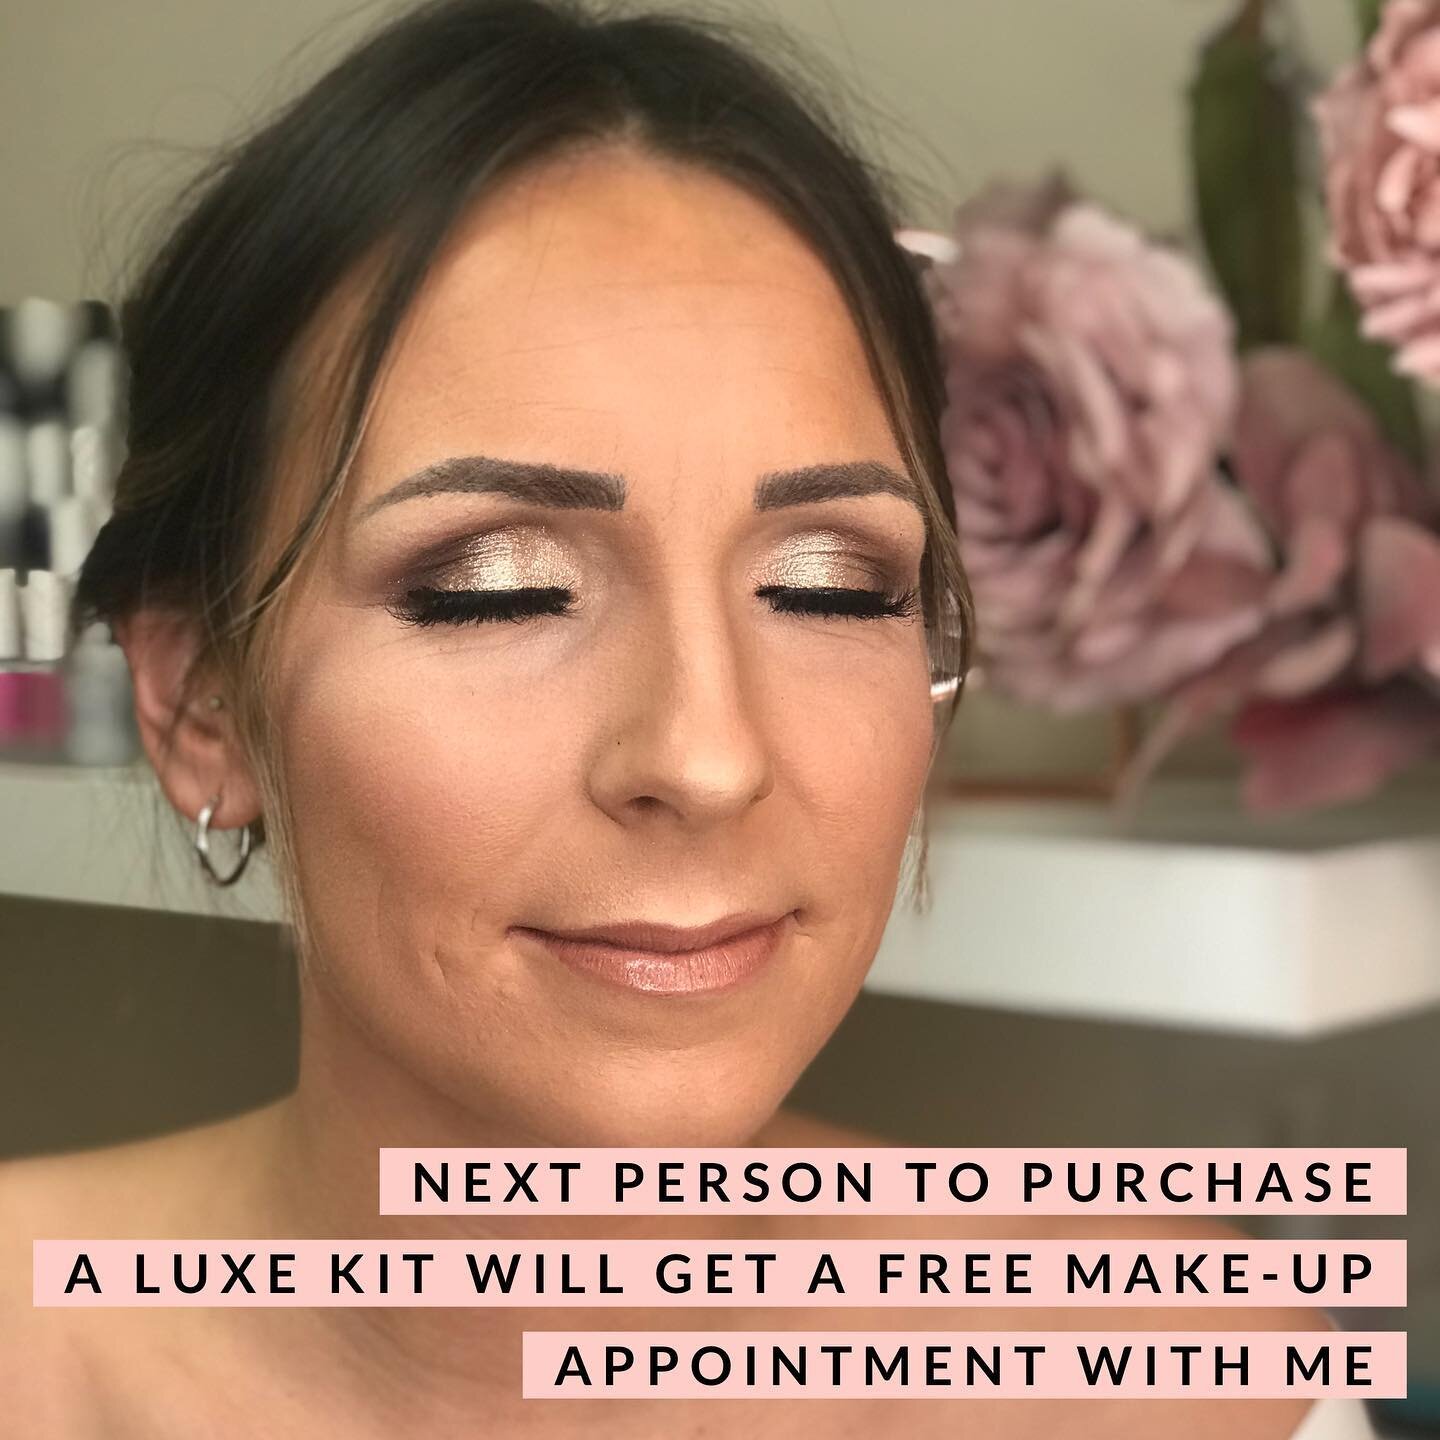 The next person to purchase a Luxe Kit will get a free make-up appointment with me! If you&rsquo;re not local to me, this can be redeemed in an online 1-2-1 make-up lesson via Zoom. 

This offer is only valid until 30th of this month and can be redee